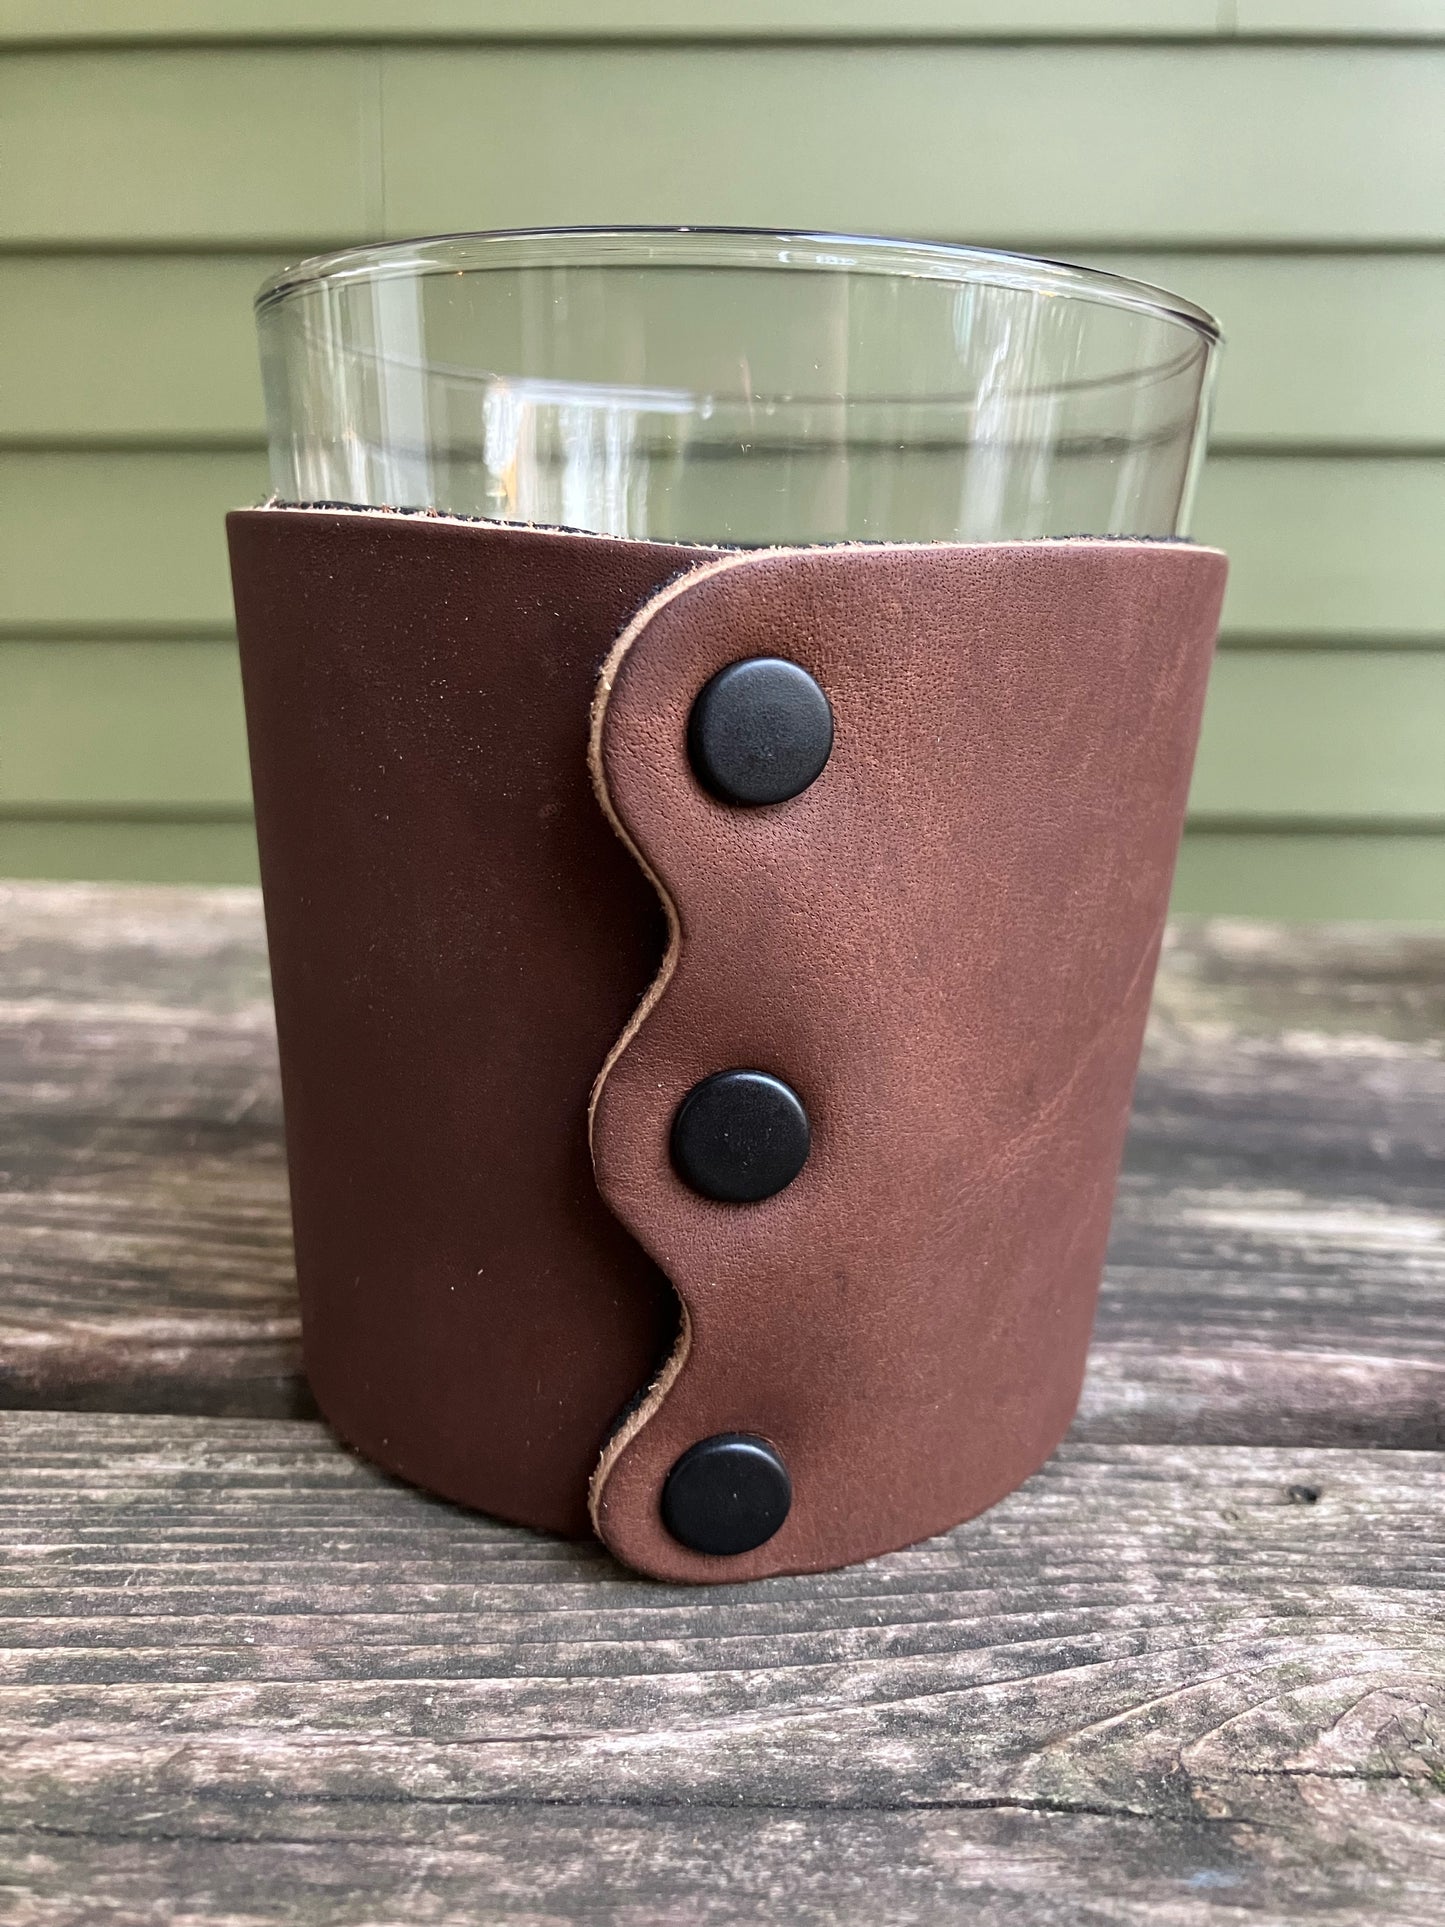 Leather Wrapped Whiskey Glass - Cowboy With Lasso